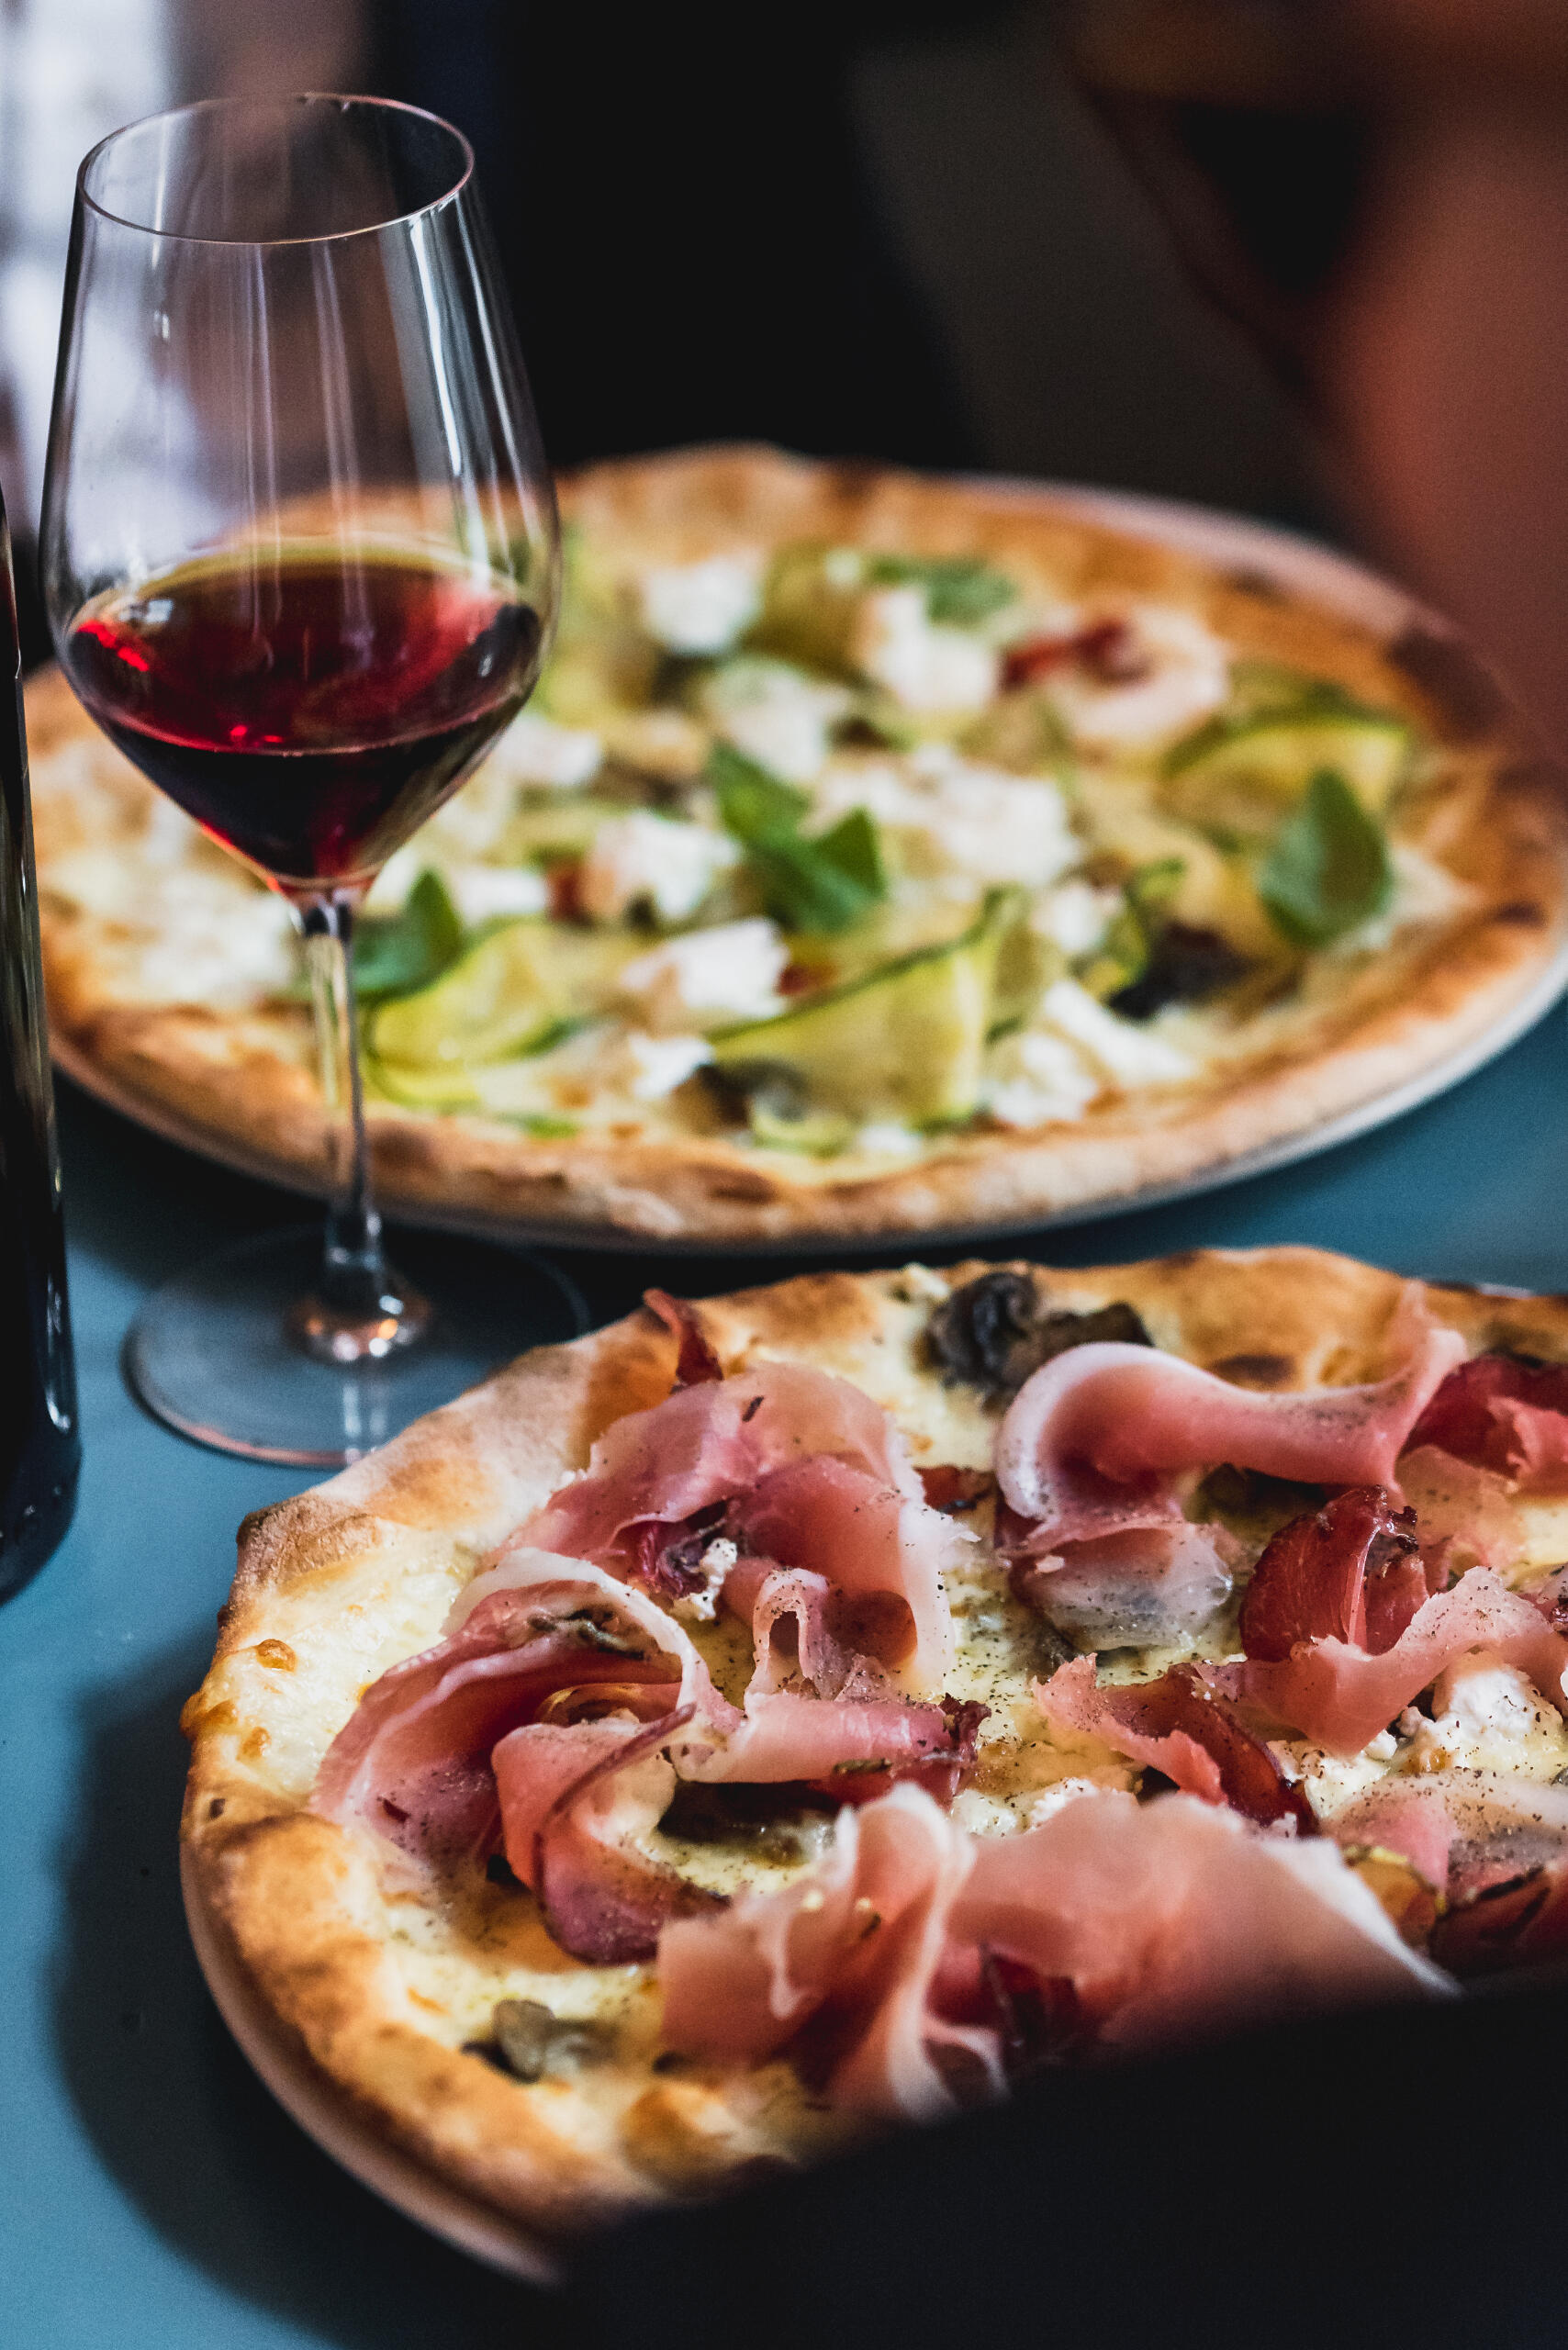 Home of Authentic Italian Pizzas Traditional Roman Pizza + Unconventional Flavours Thin, Crunchy Dough Explore Organic Italian Wines Mysundegade 28 Copenhagen Wed-Sun 18-24 Book a table to Take-away